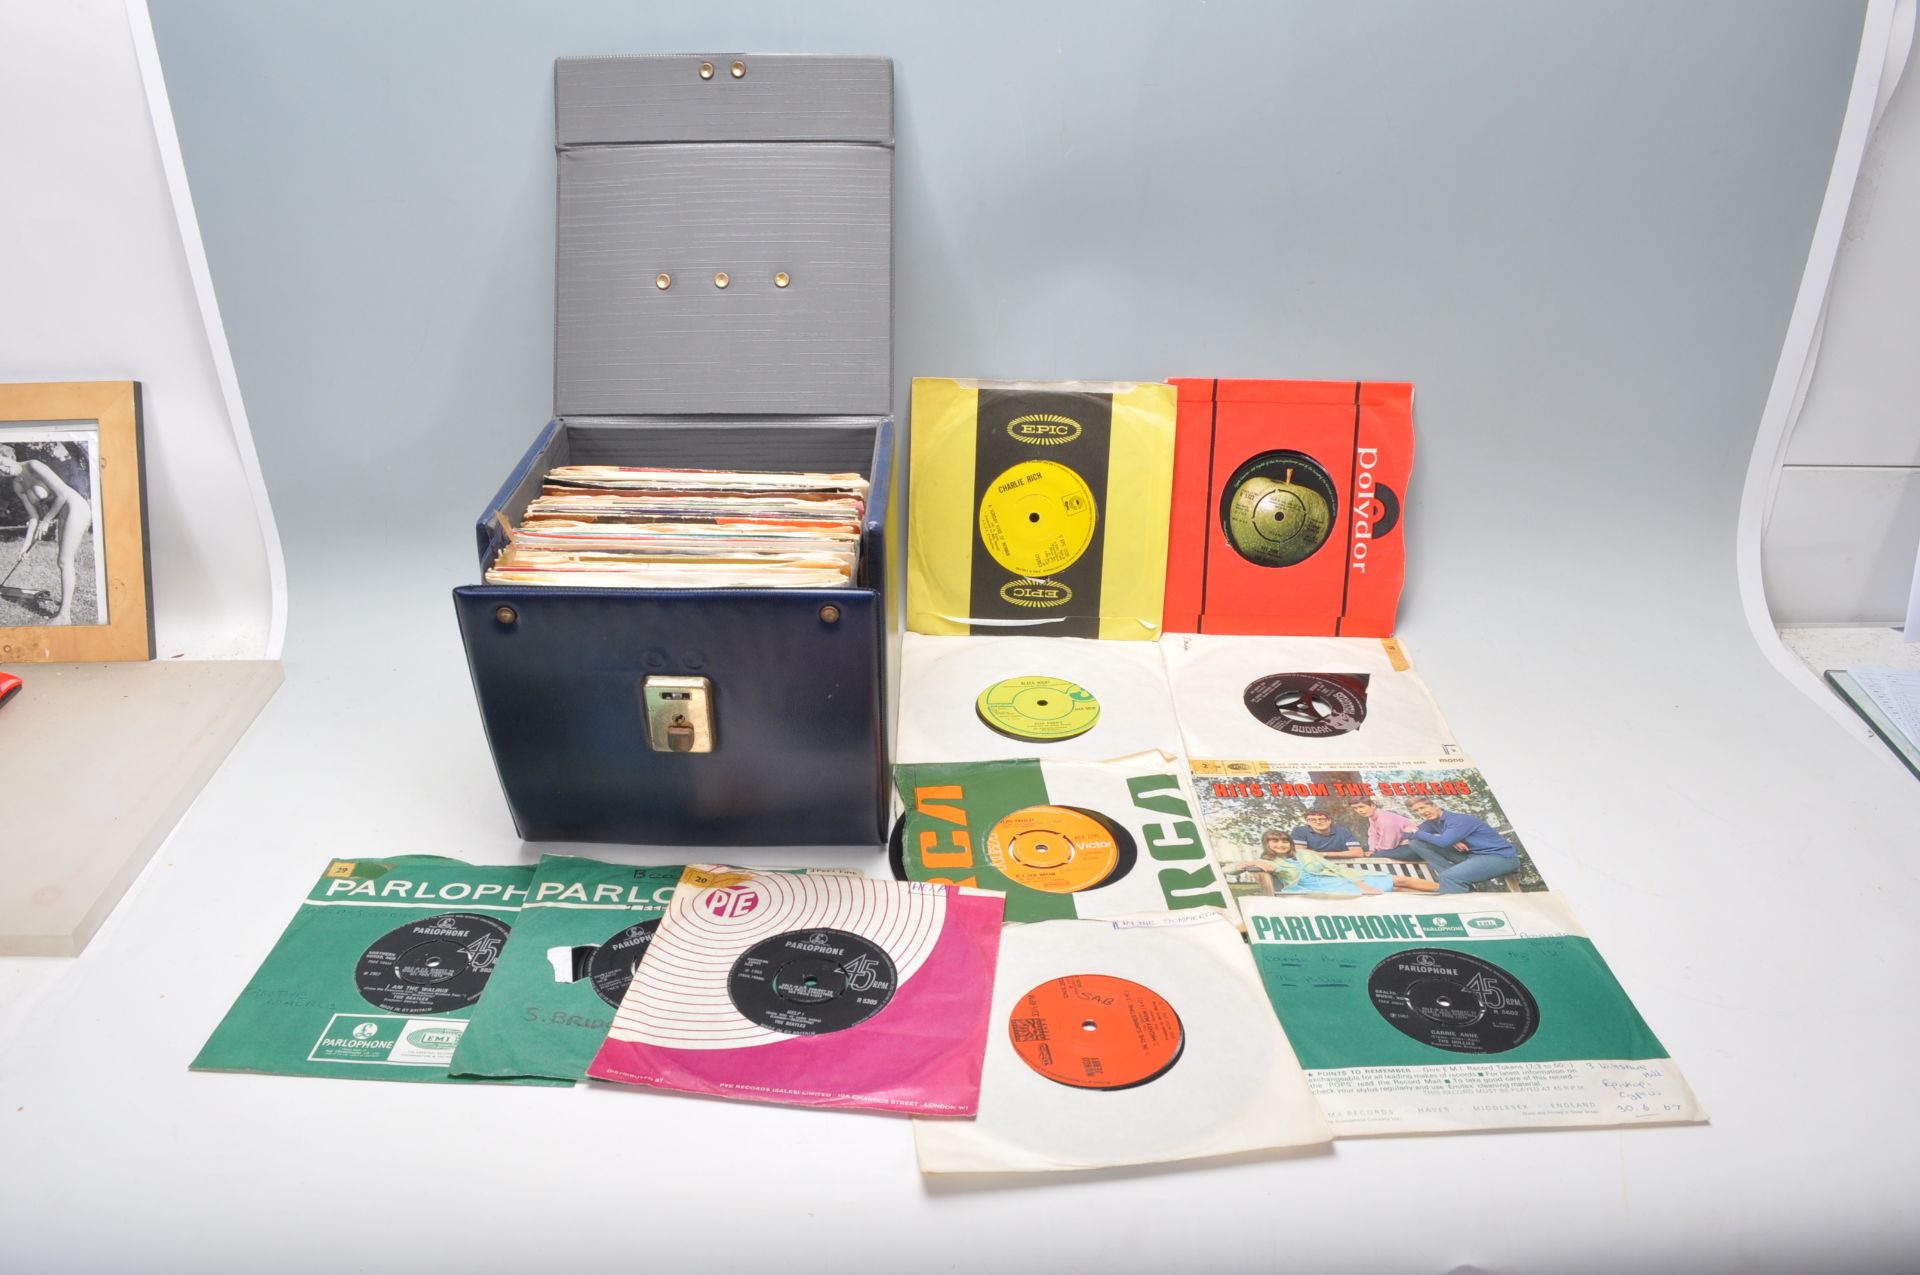 A case full of 45rpm vinyl 7" singles of varying artists and genres to include multiple Beatles